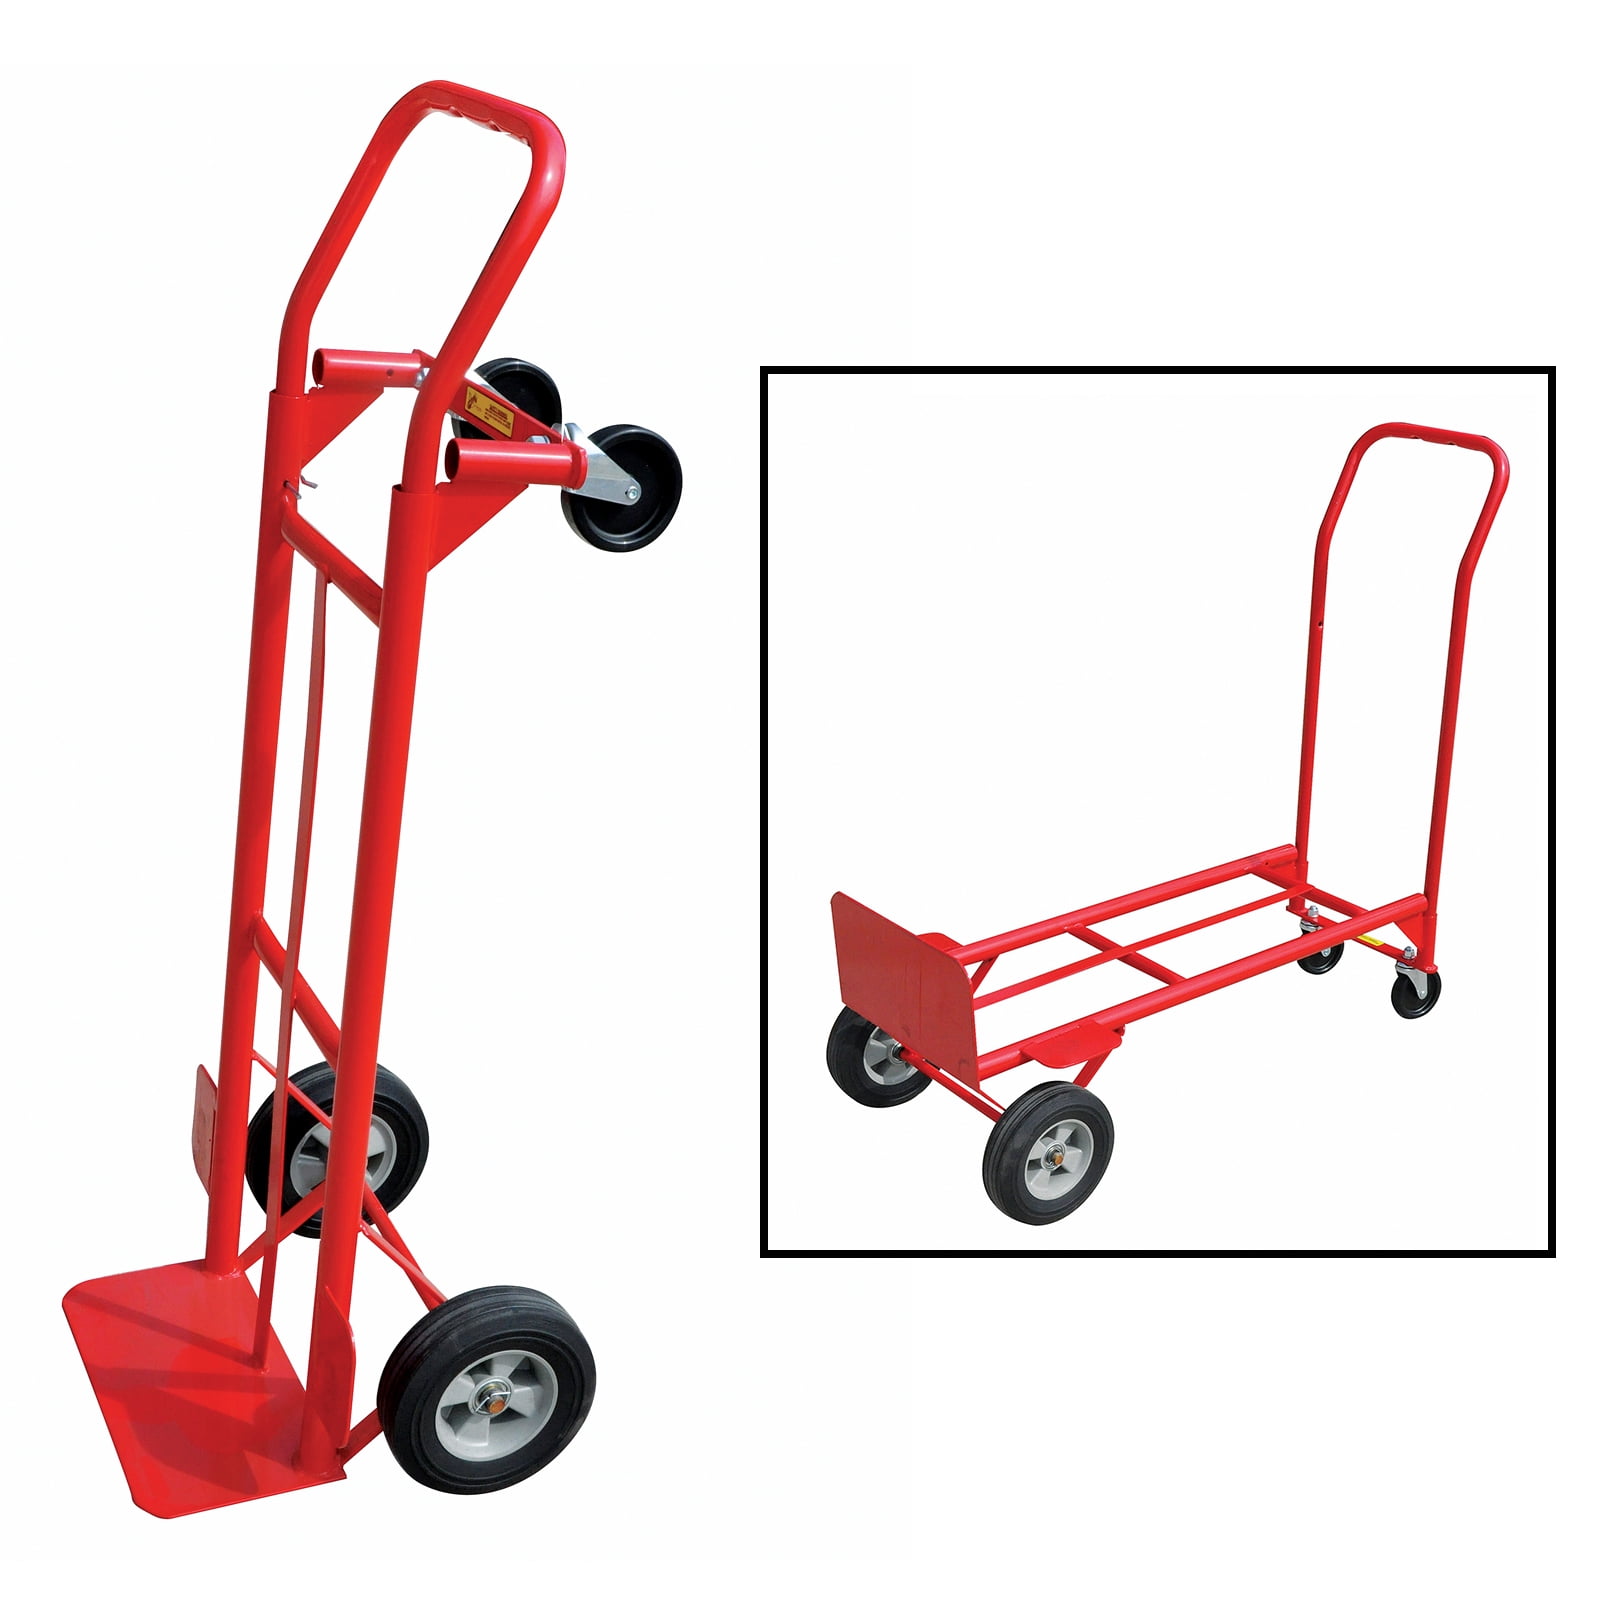 400 lb NEW Harper Trucks 2-in-1 Convertible Hand Truck and Dolly Capacity 